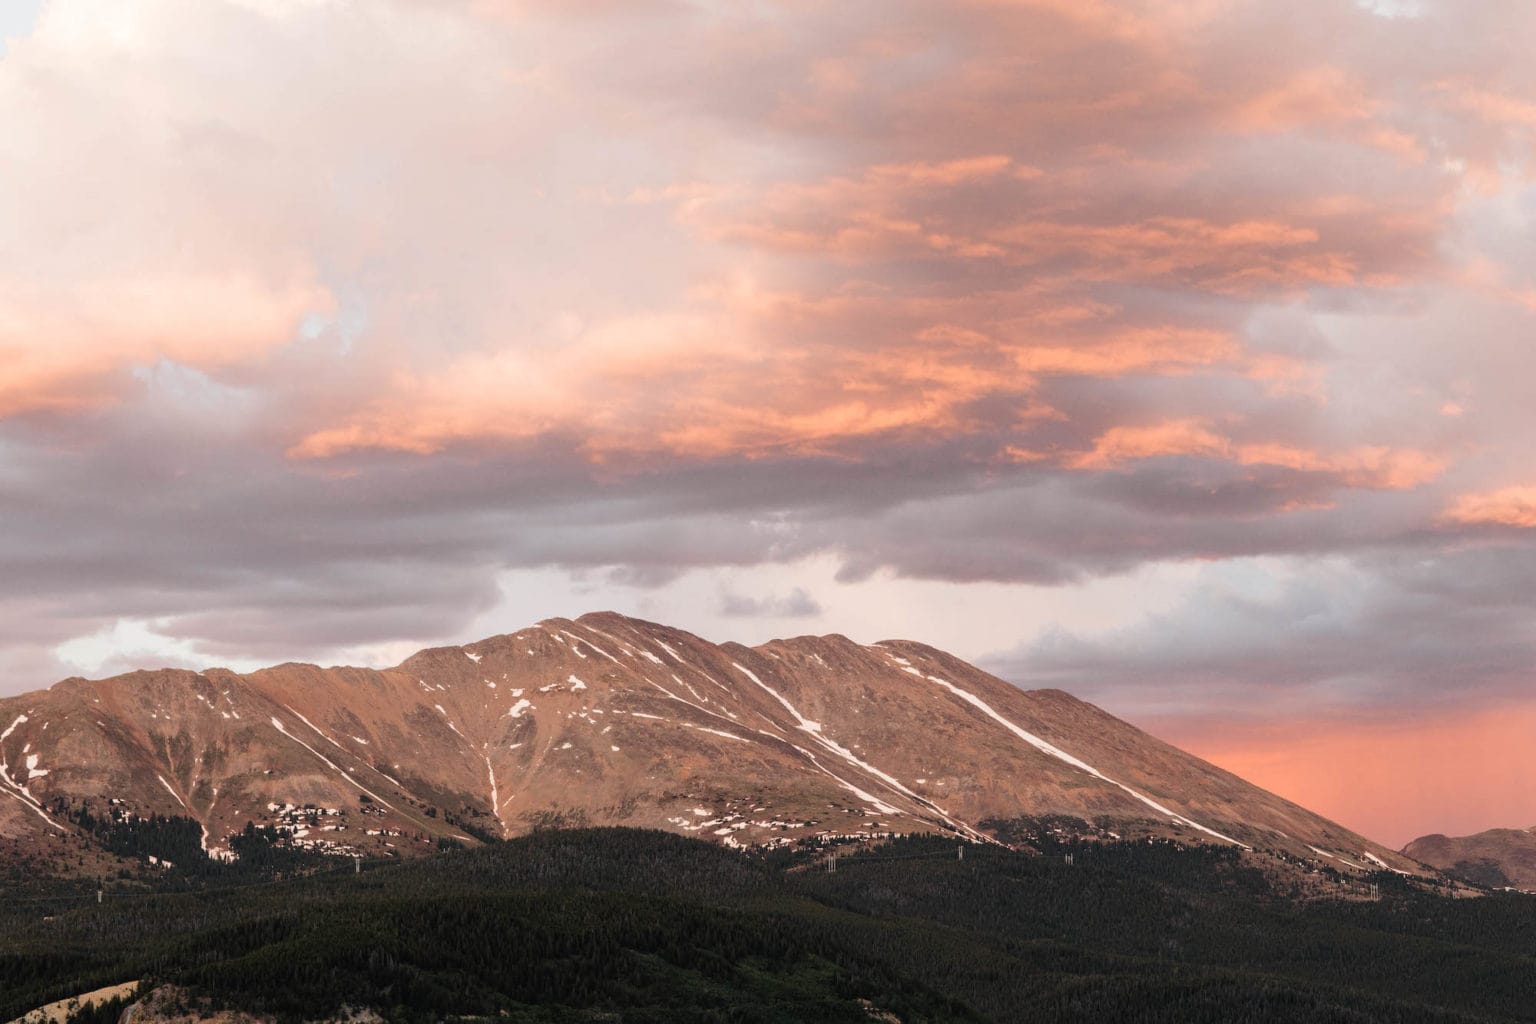 cotton candy sky sunset mountain landscape near Breckenridge Airbnb options